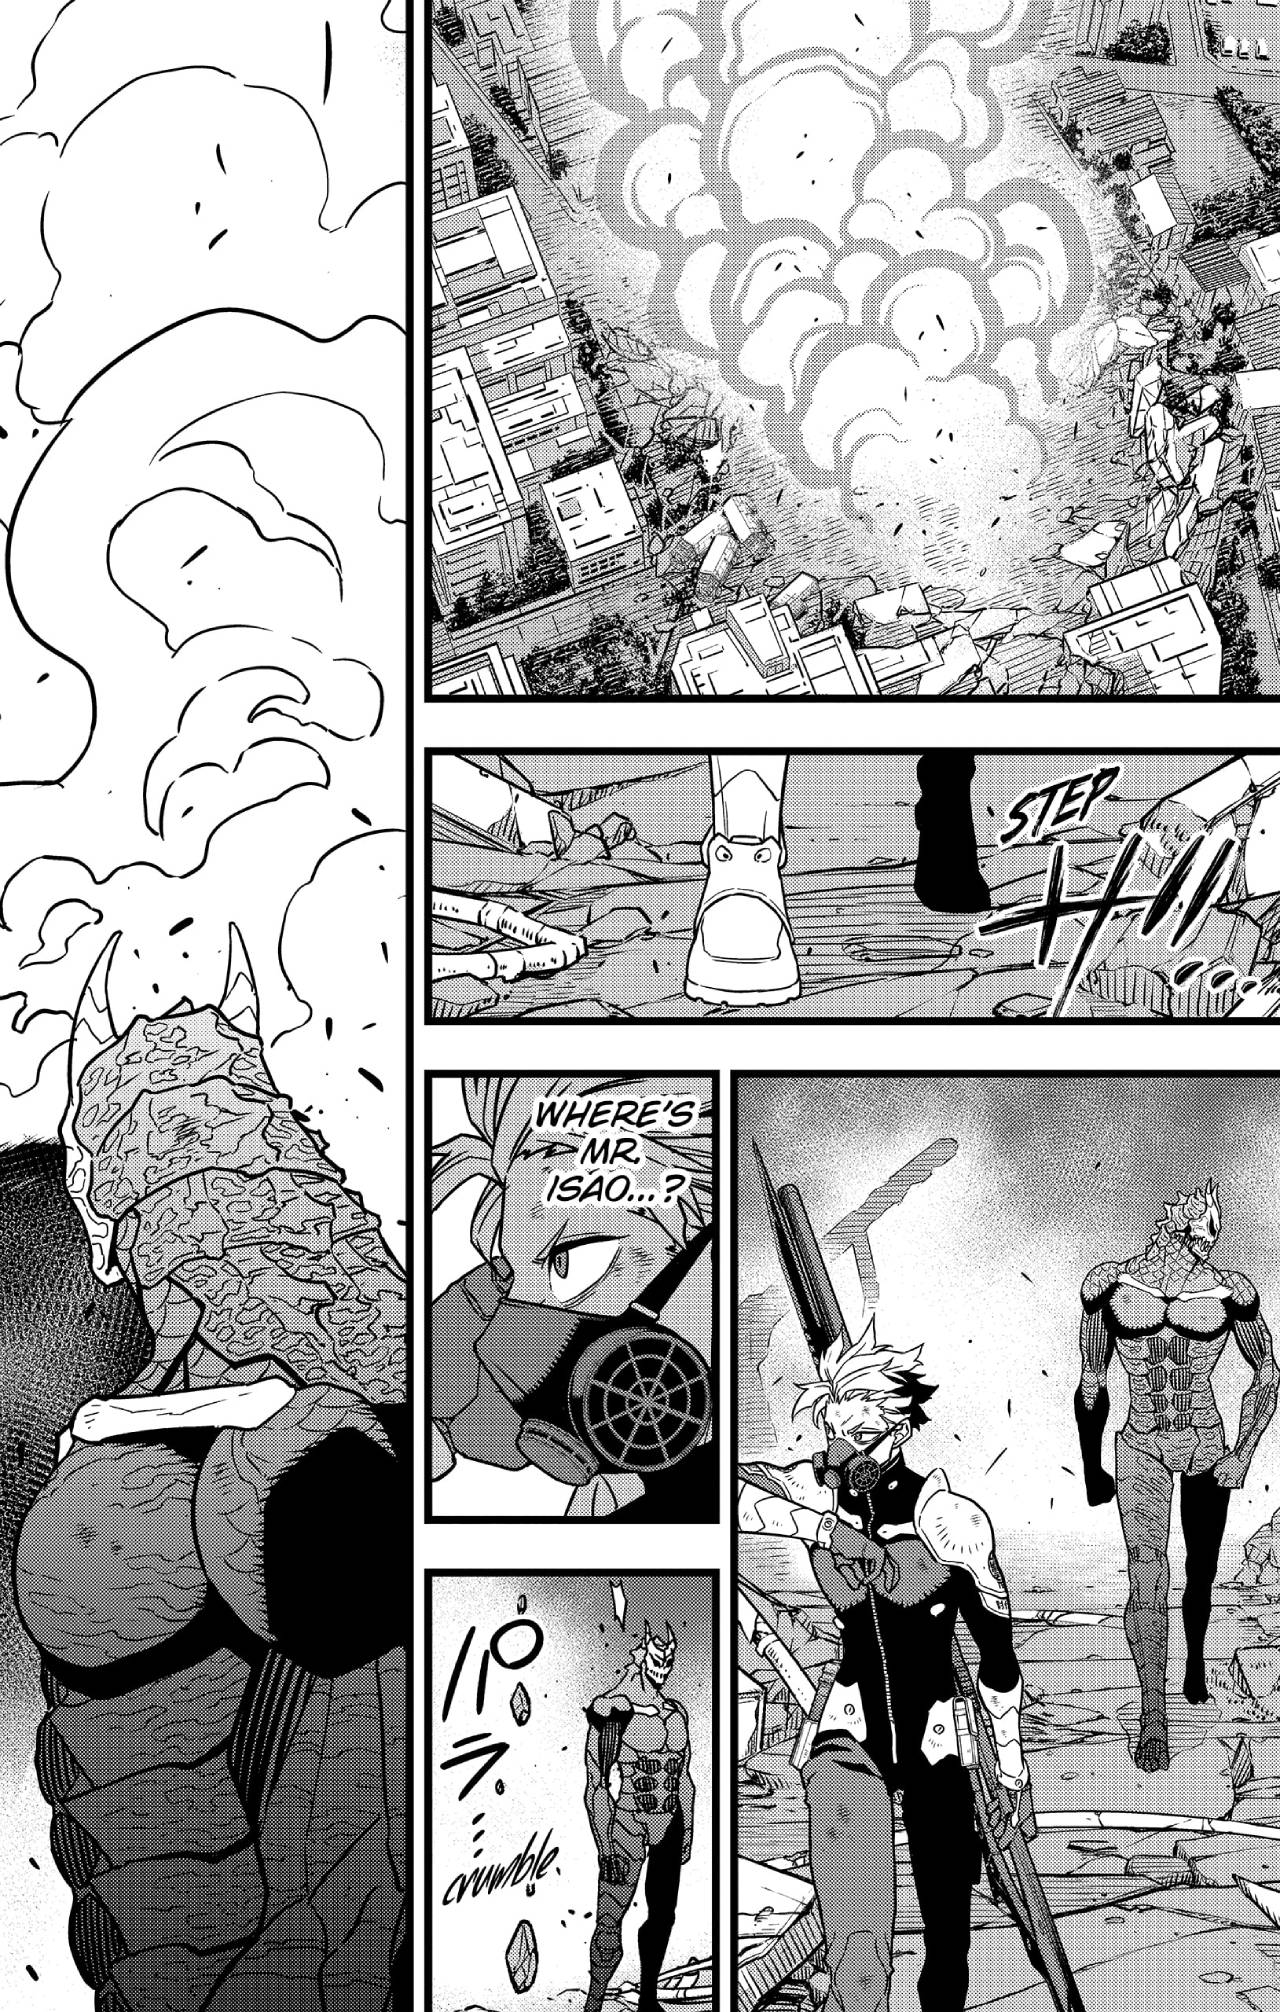 Kaiju no 8 Chapter 51, monster #8 chapter 51